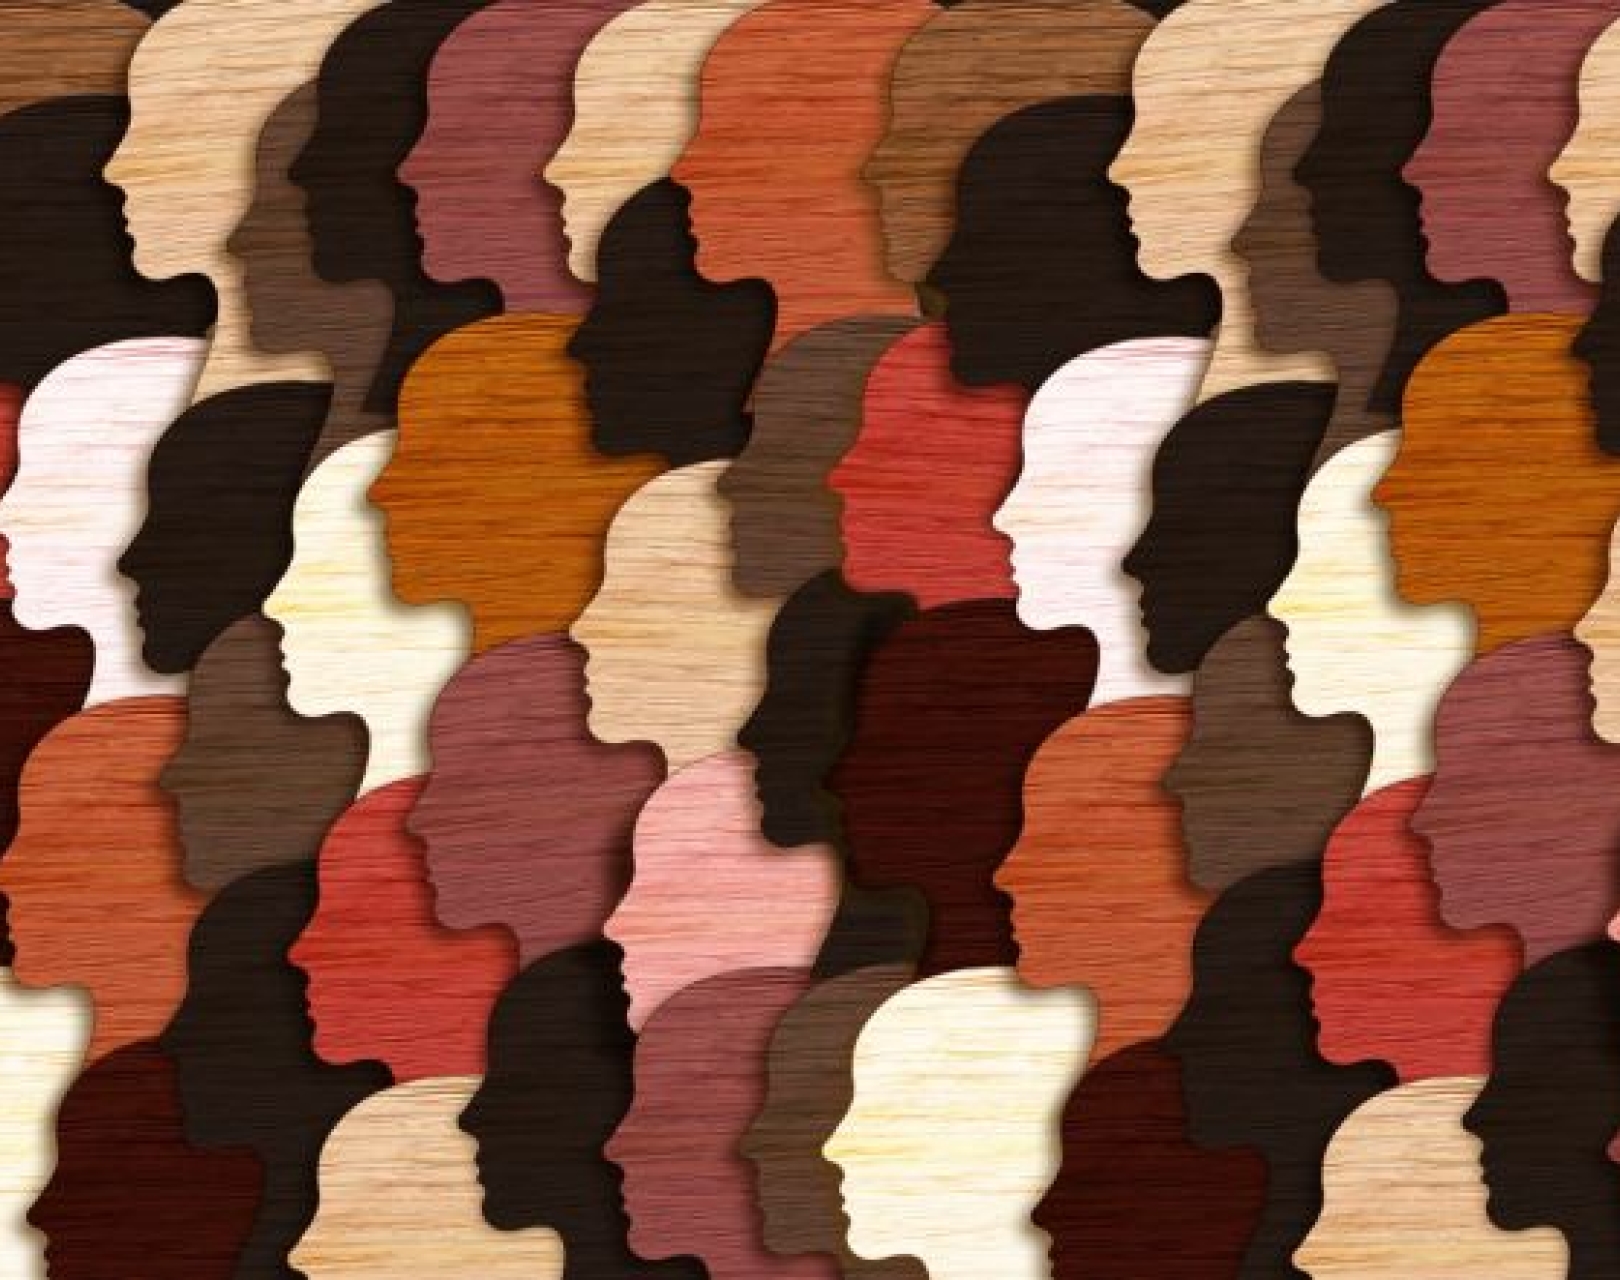 A collage which consists of the side profile of many heads, cut out and facing to the left of the screen. The heads have a wooden texture. The heads are in various shades of wood, from dark to light.